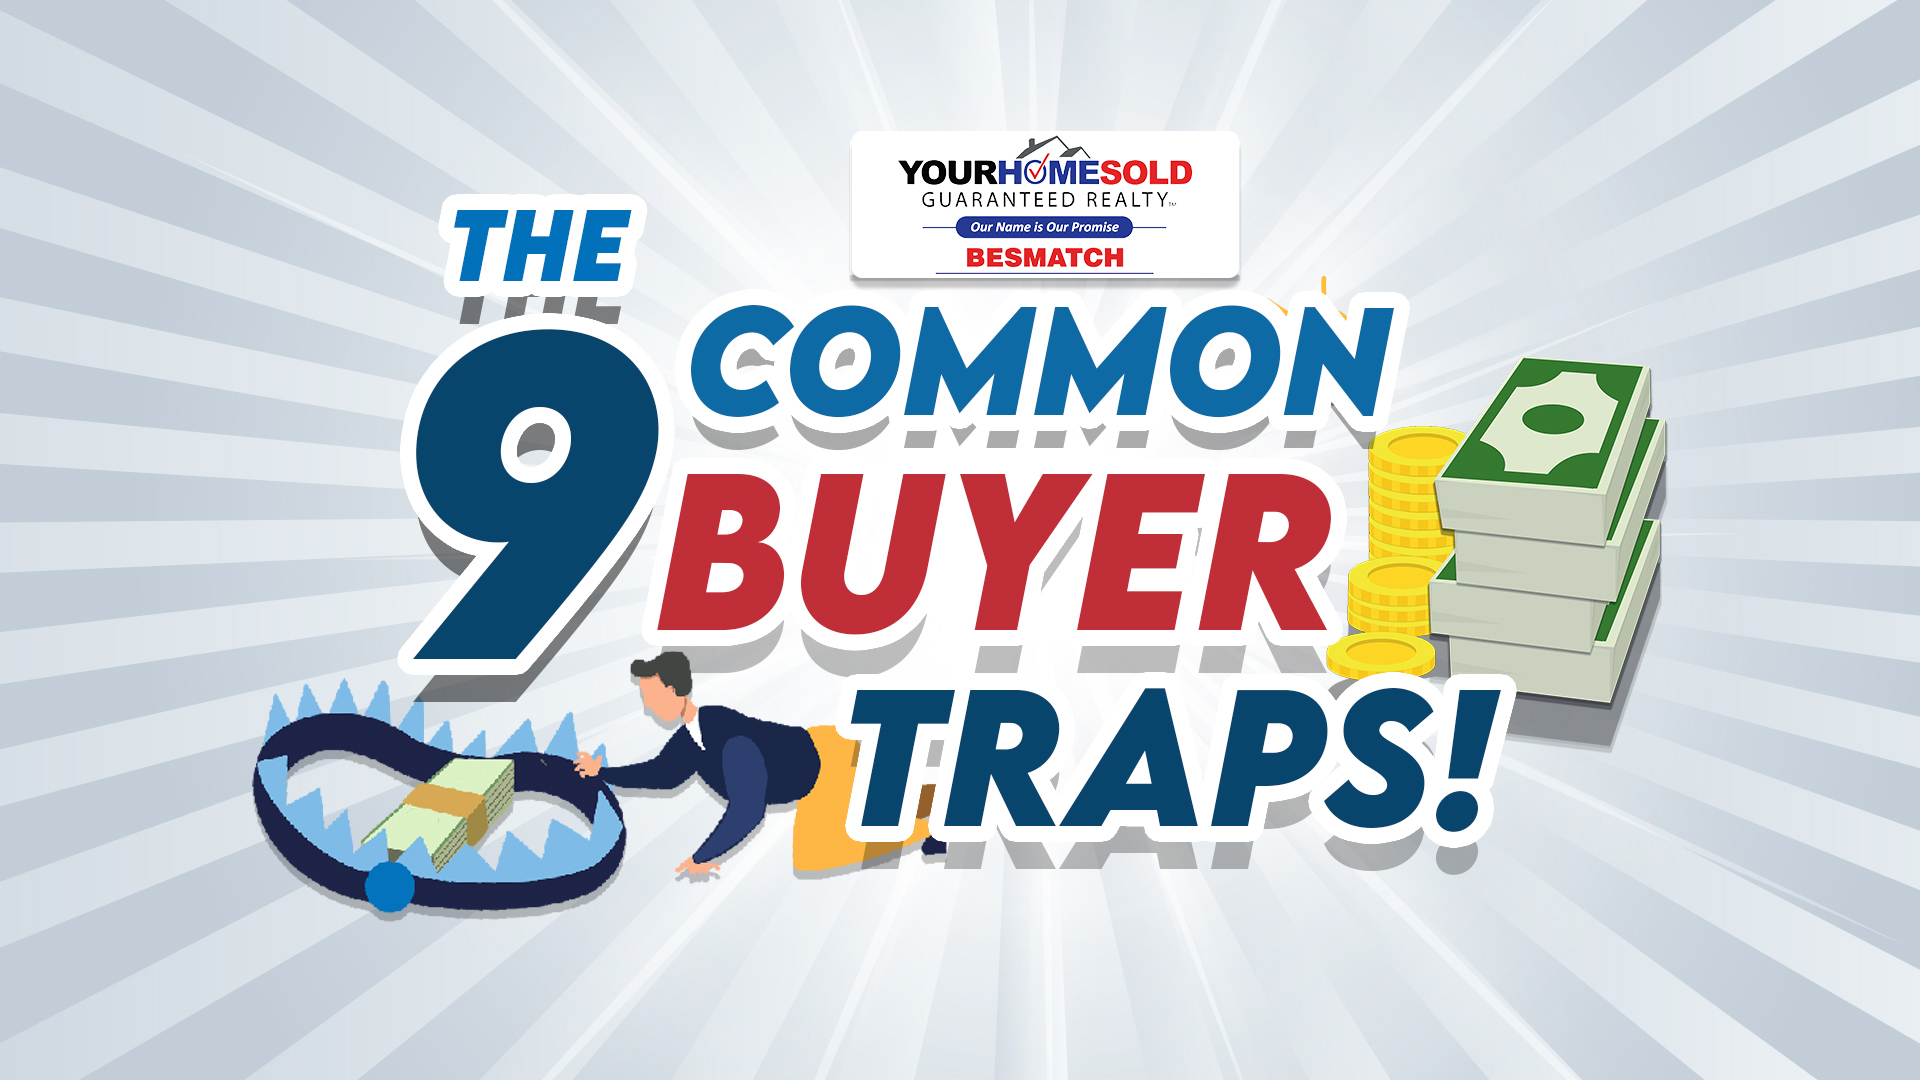 How to Avoid 9 Common Buyer Traps BEFORE Buying a Home